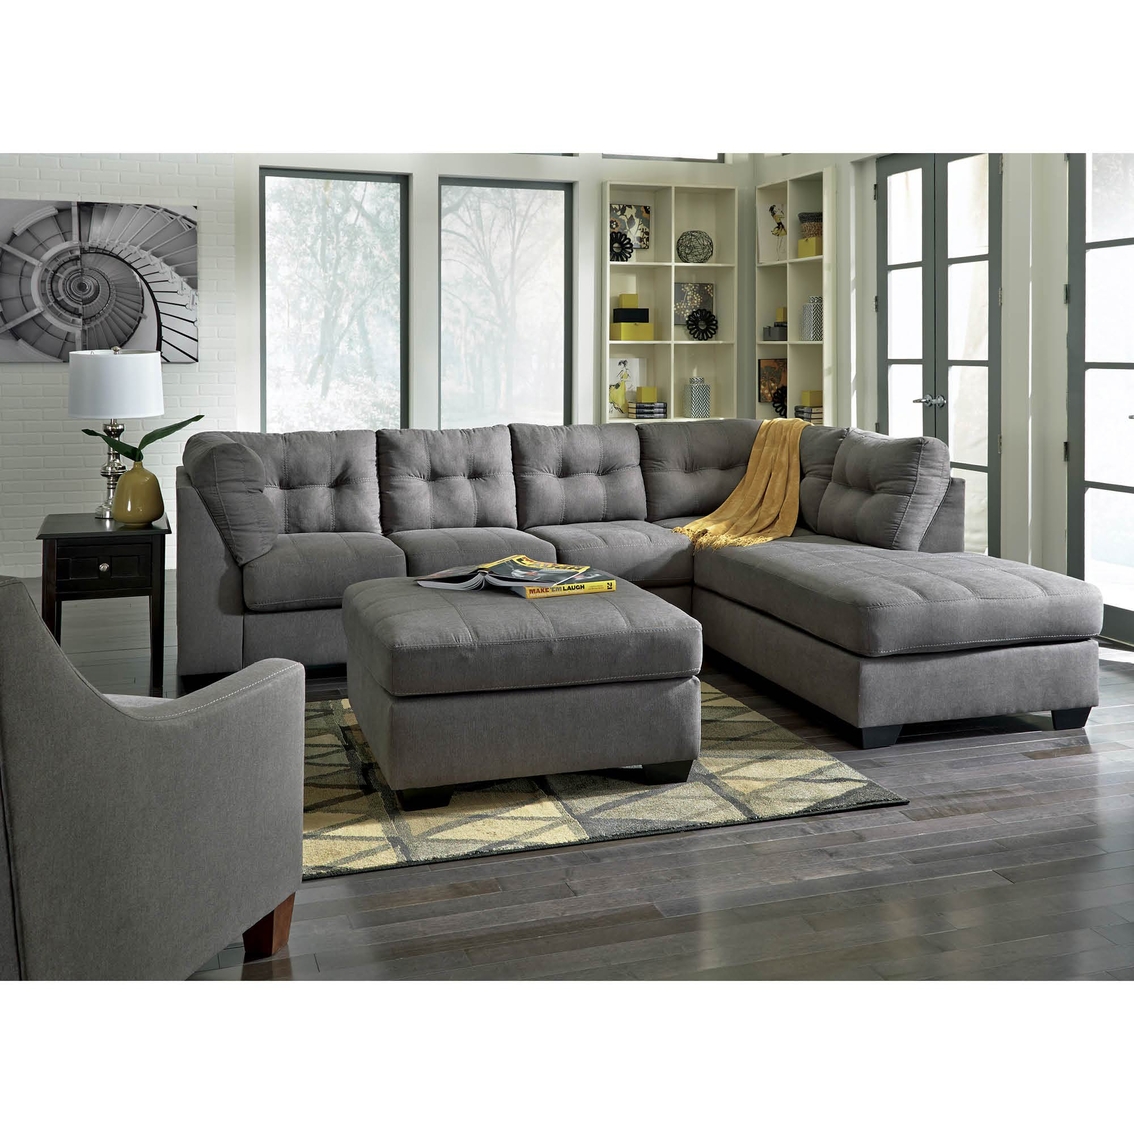 Benchcraft Maier 2 Pc. Sectional Sofa with Left Corner Chaise - Image 3 of 3